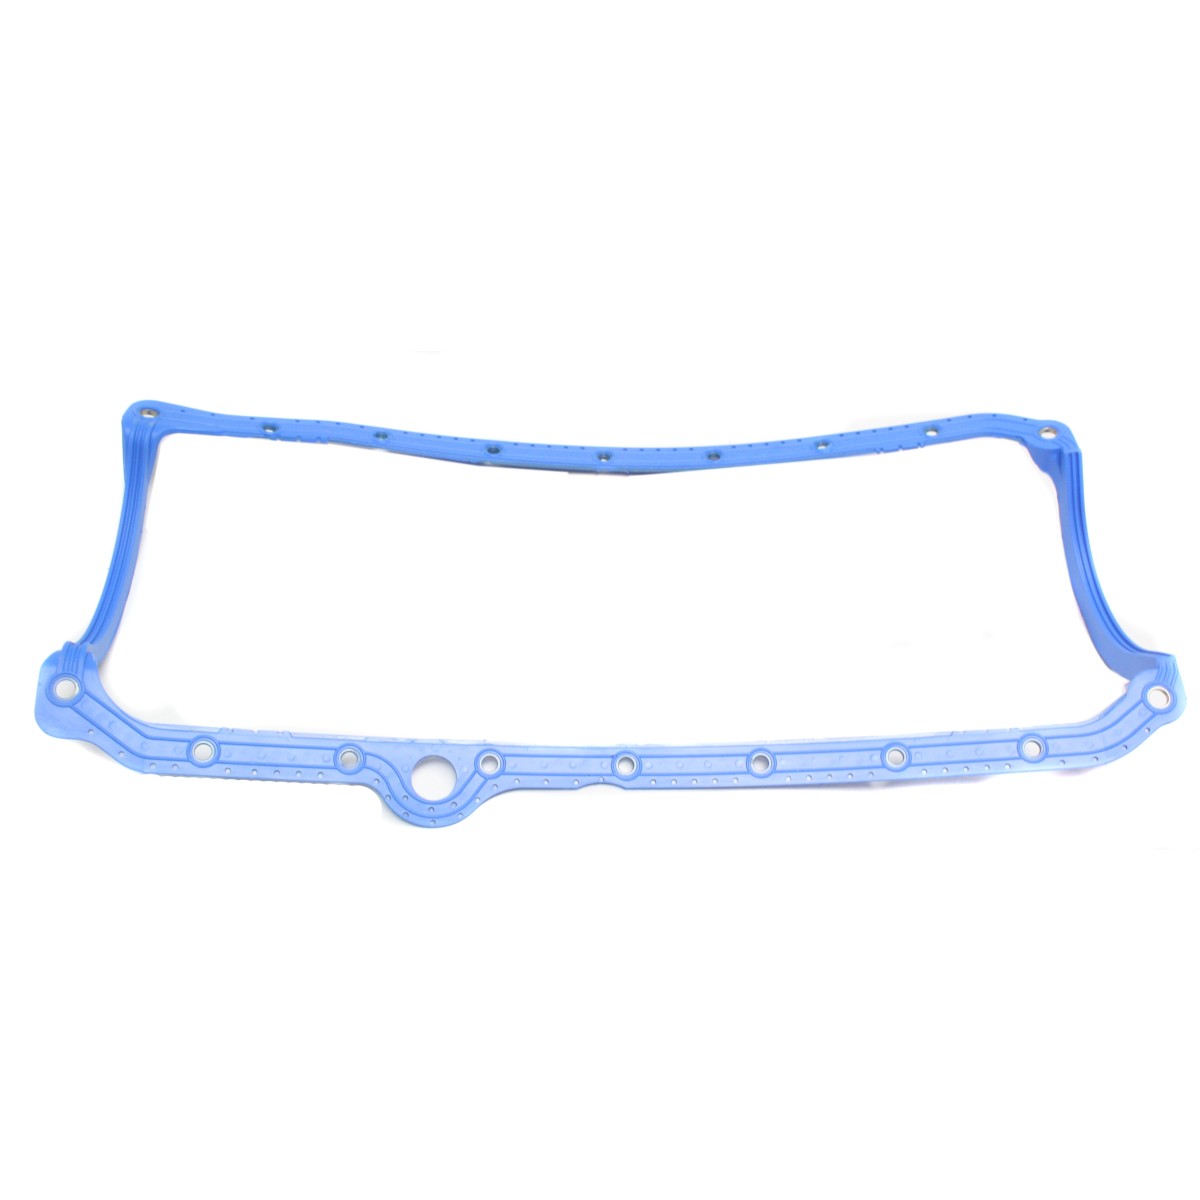 OS34500R Felpro Oil Pan Gaskets Set New for Chevy Suburban Express Van ...